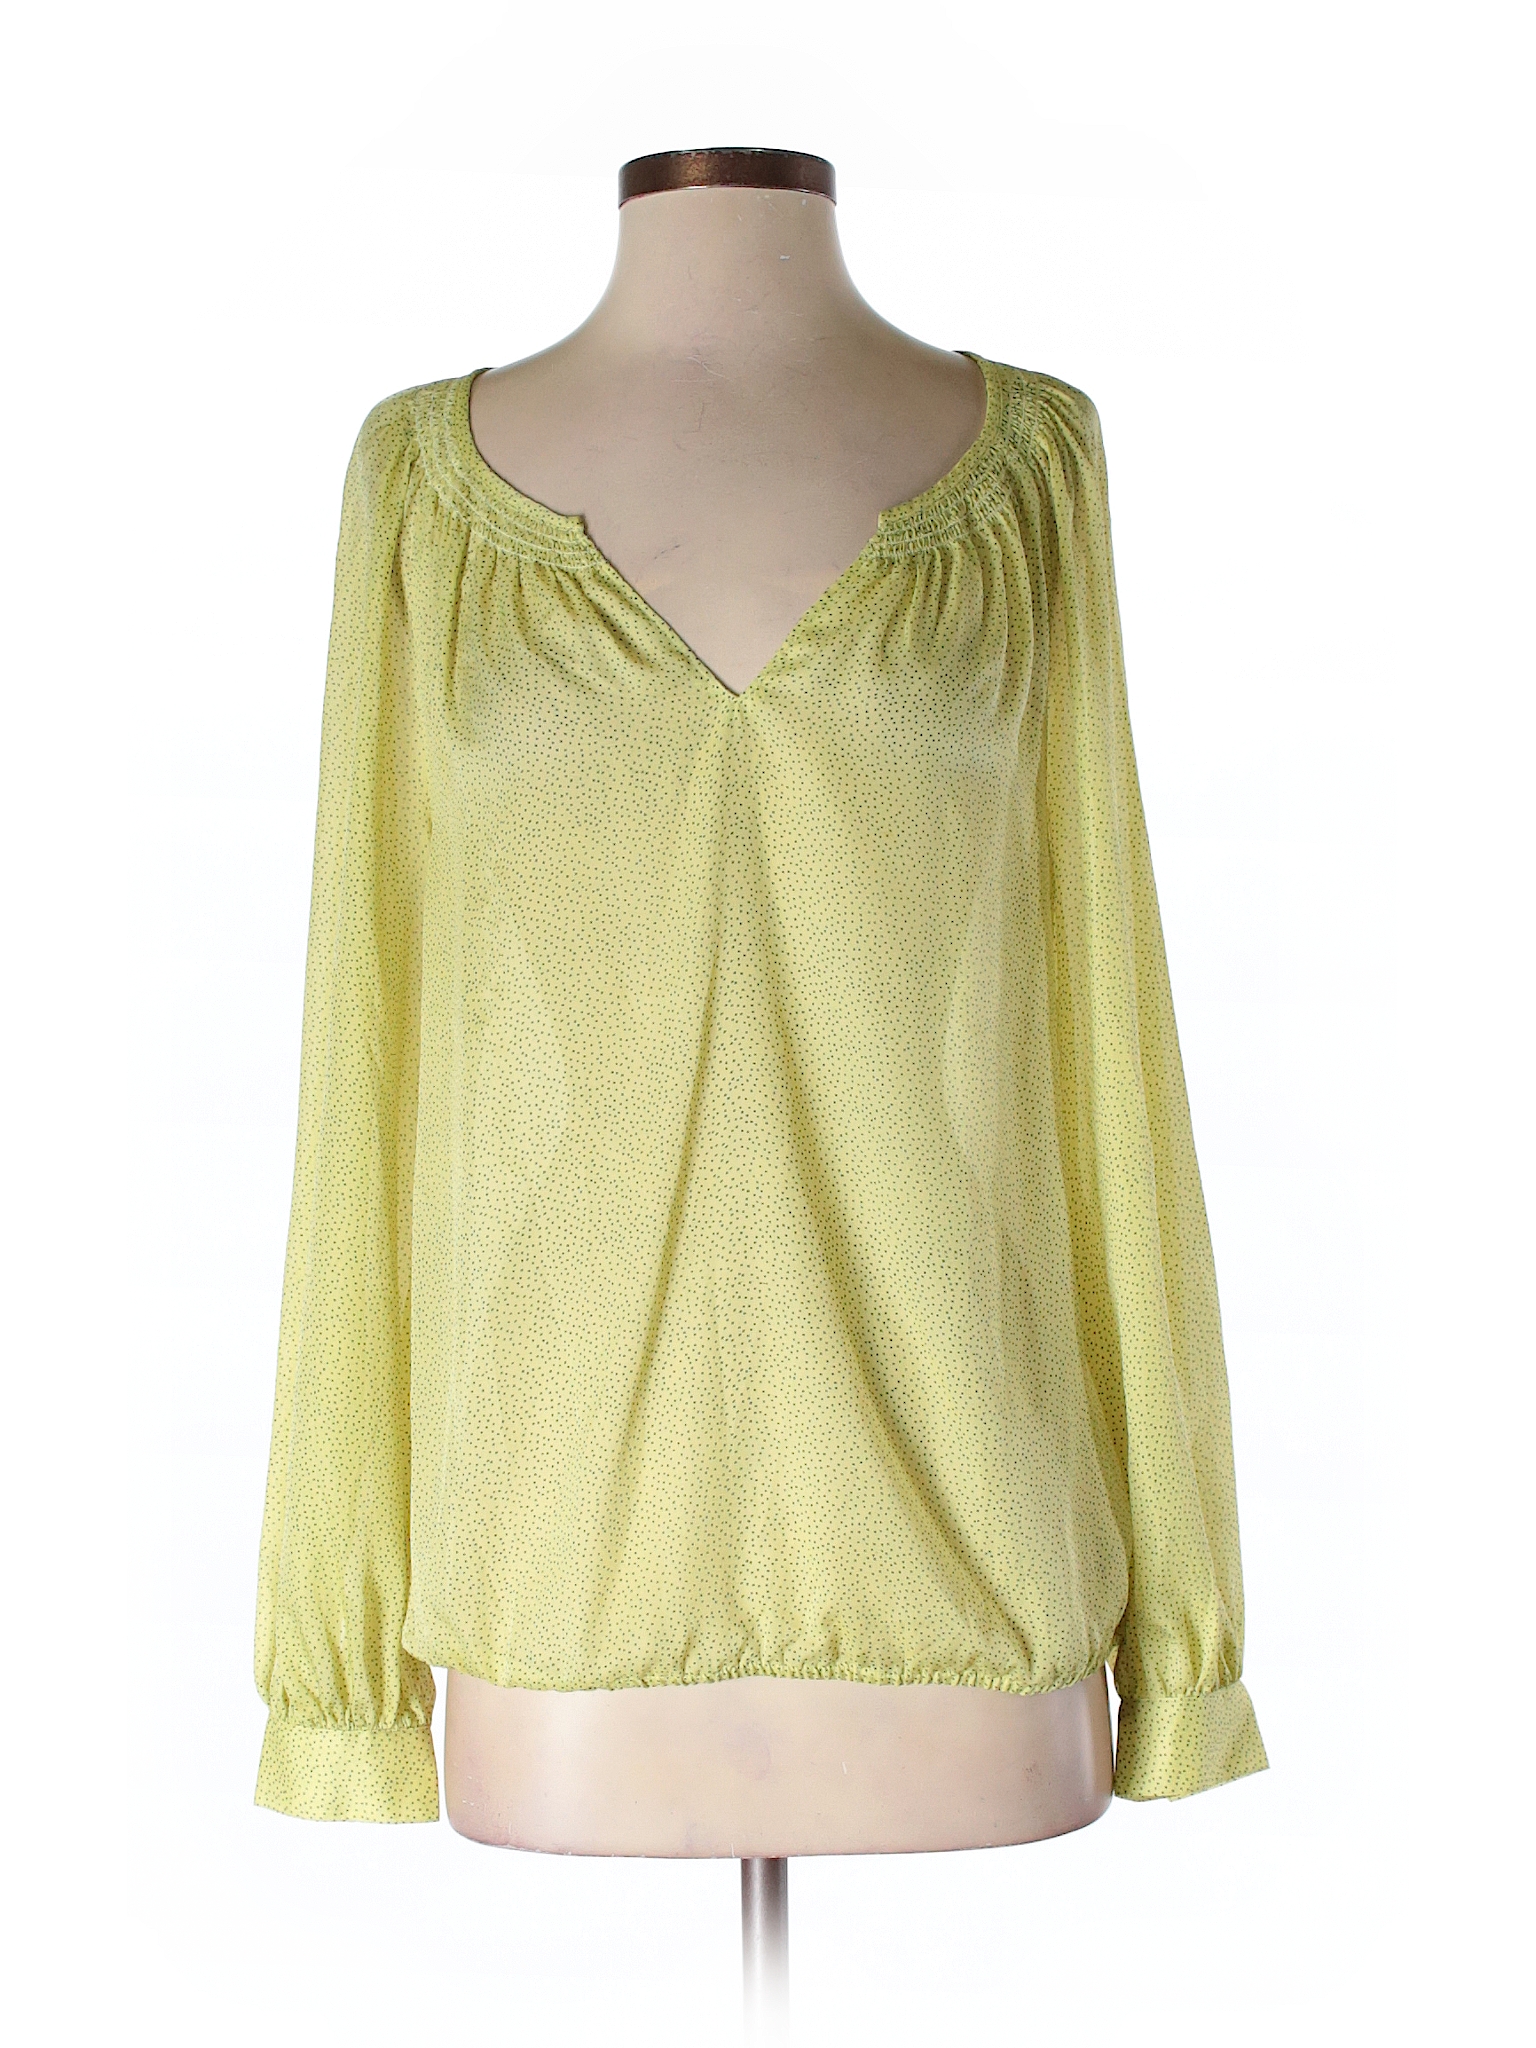 Ann Taylor LOFT 100% Polyester Solid Yellow Long Sleeve Blouse Size S ...